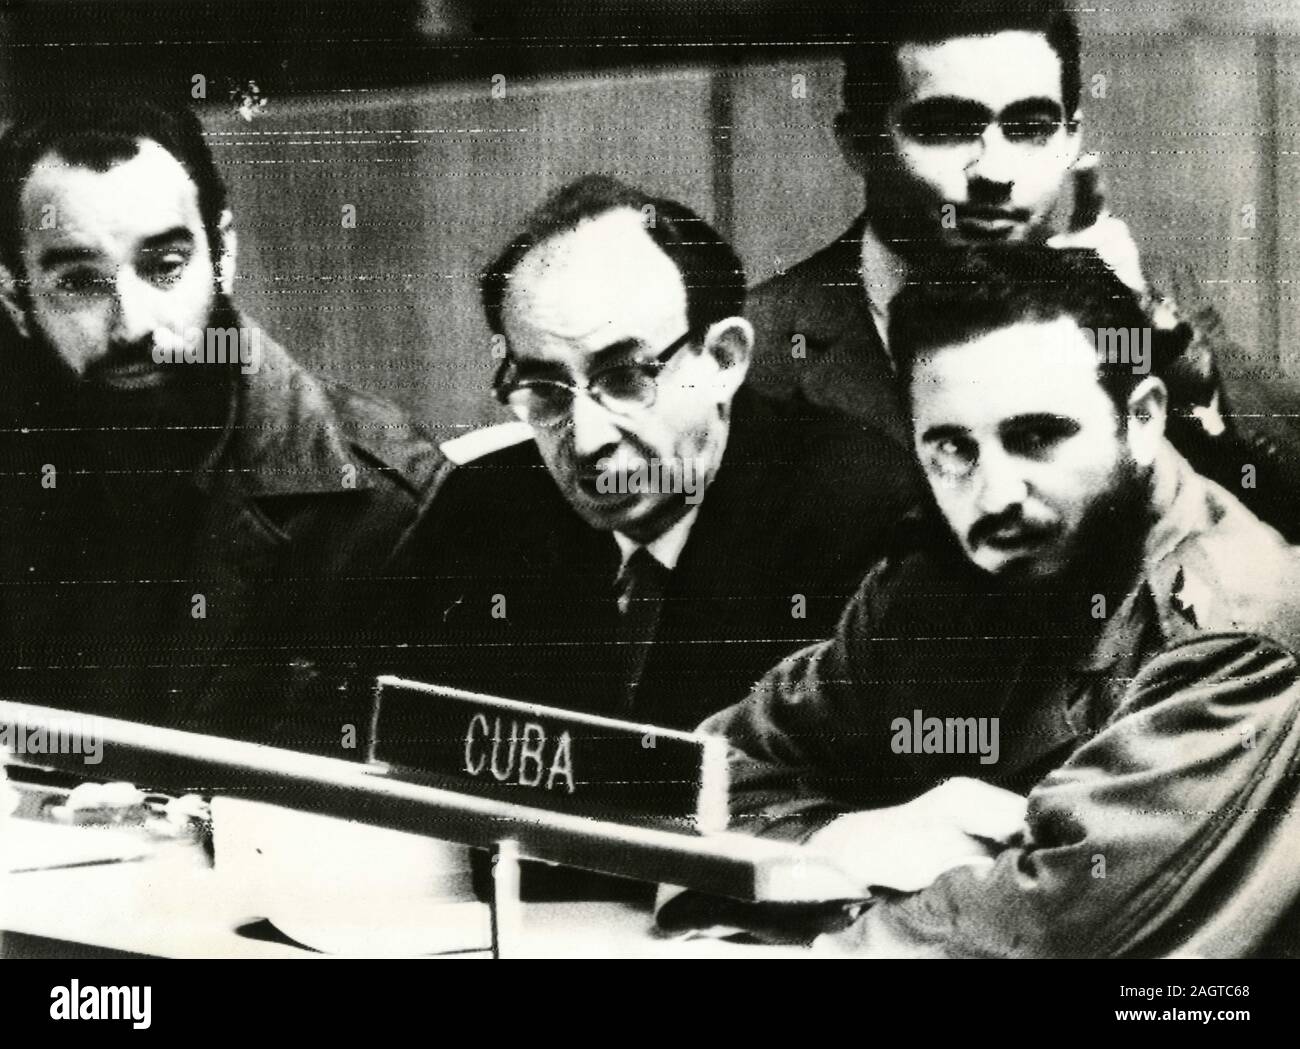 Cuban delegation at the United Nations: from left Antonio Munoz Jimenez Minister of Agriculture, M. Roa Minister of Foreign Affairs, and Fidel Castro, New Yourk, USA 1960 Stock Photo